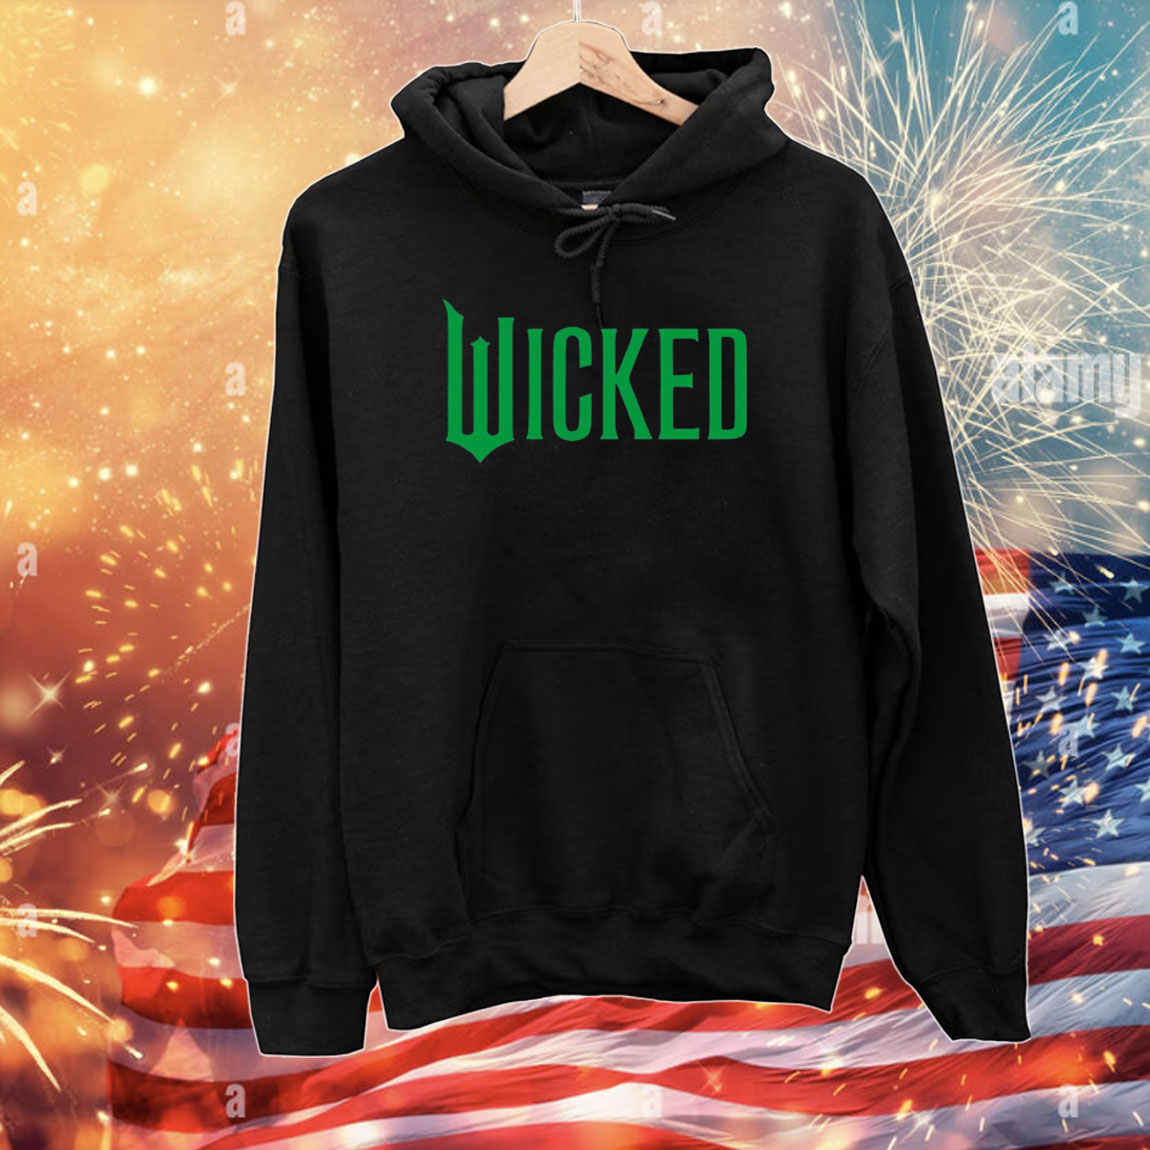 "Wicked" Movie T-Shirts